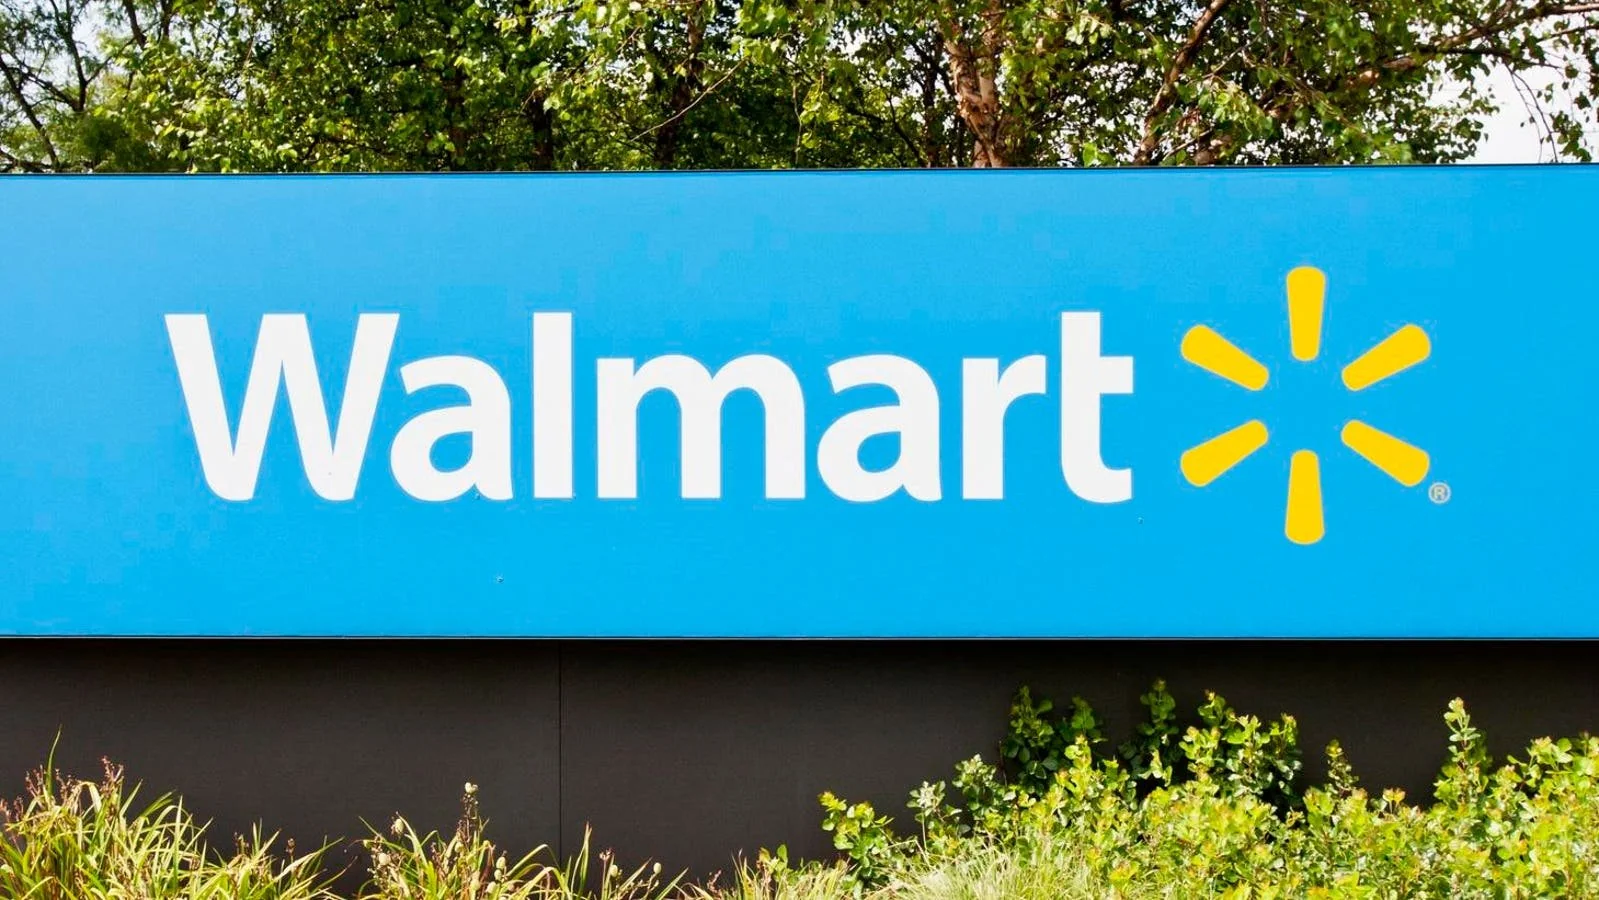 Walmart Shuts Down Health Clinics Nationwide: A Surprising Pivot Away from Medical Care